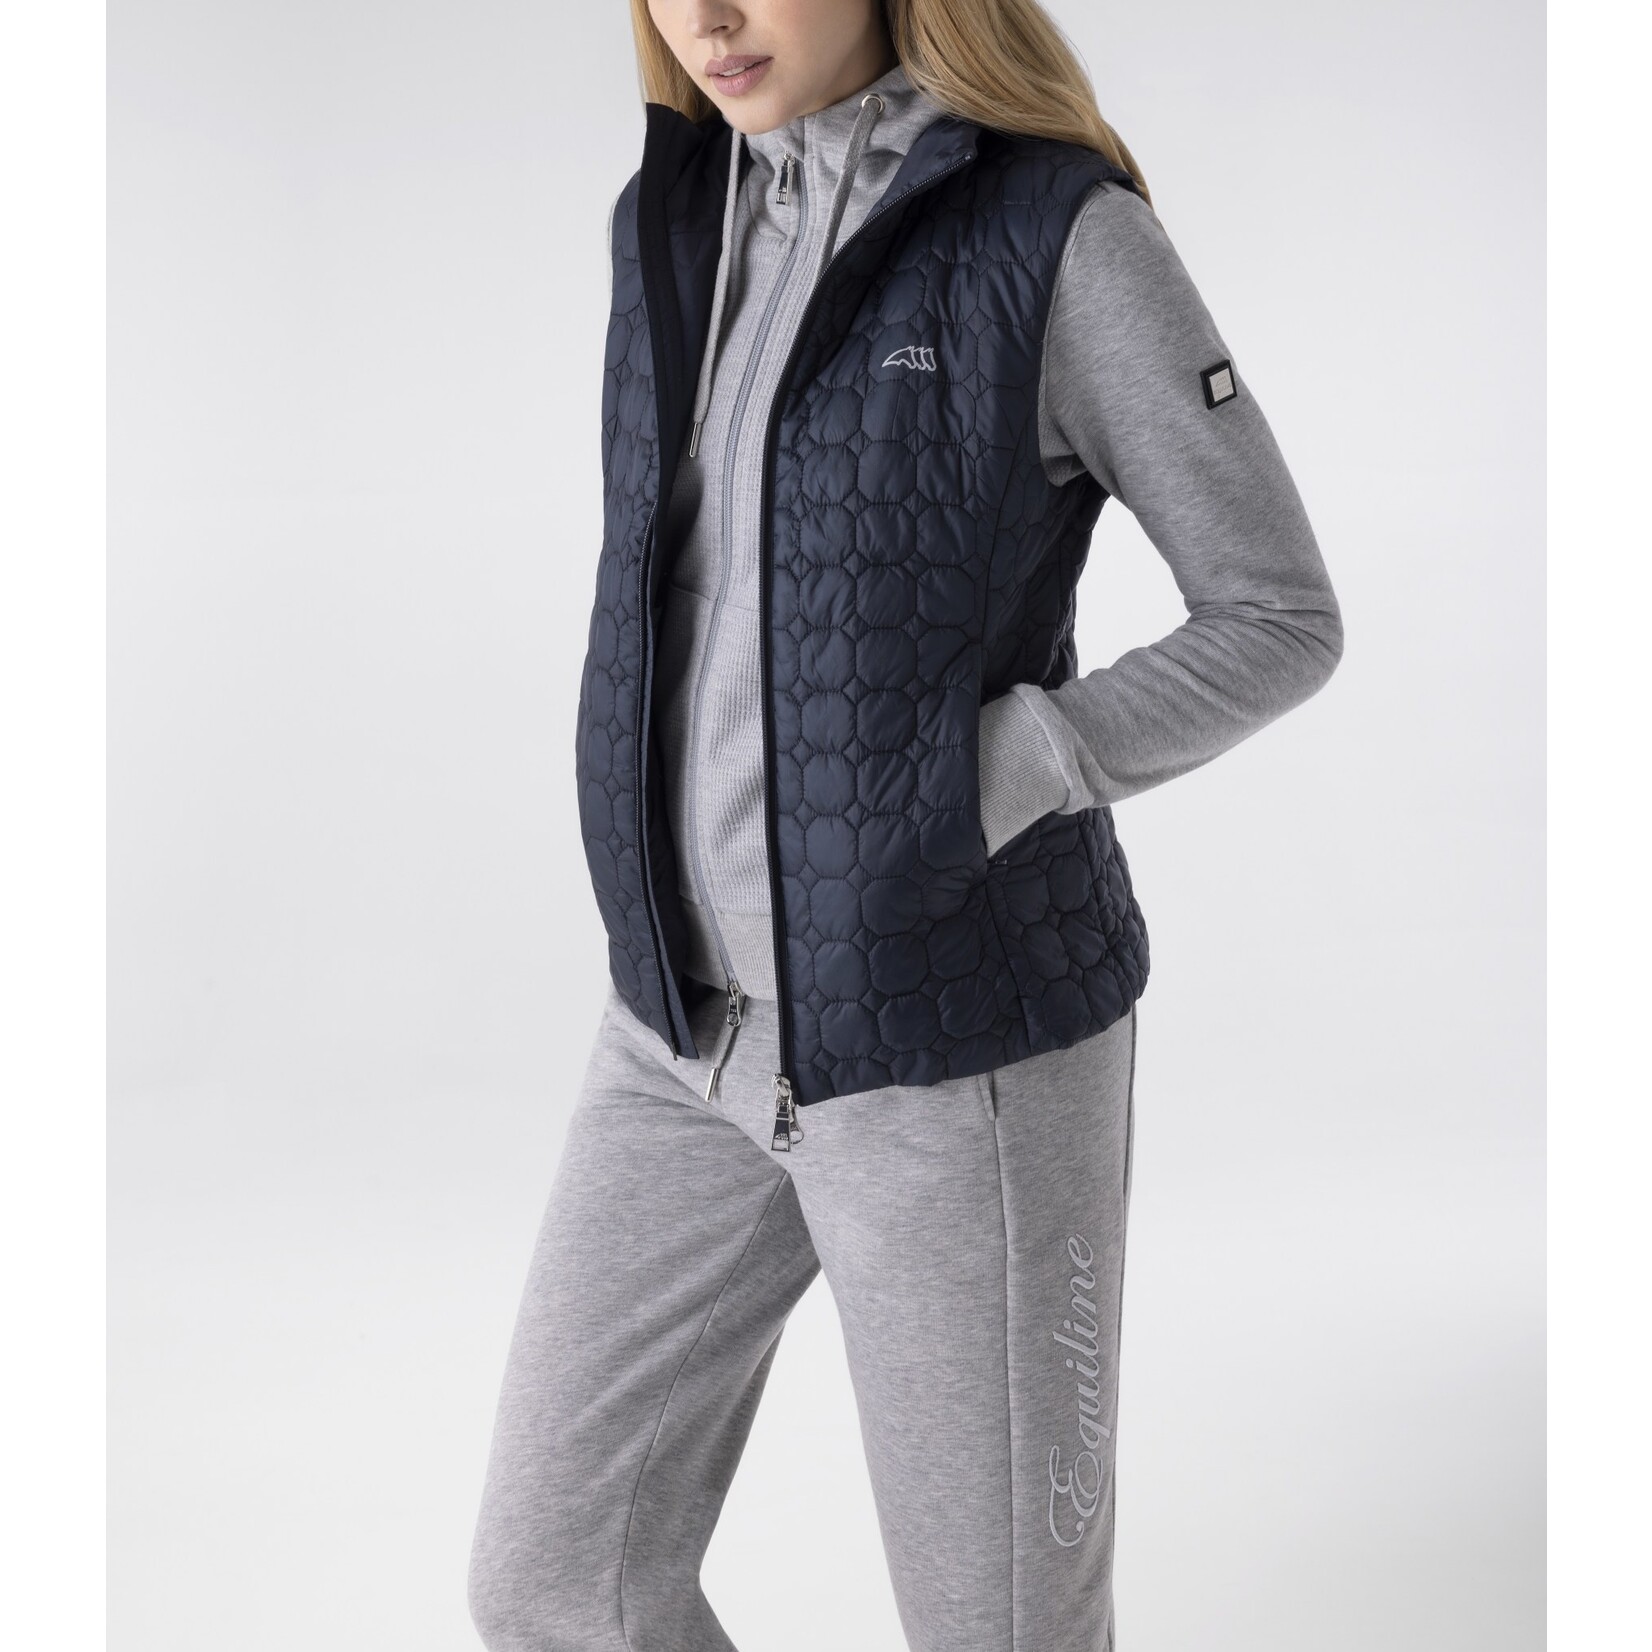 Equiline Q10741 Equiline Edaev Women's Octagon Quilted Vest